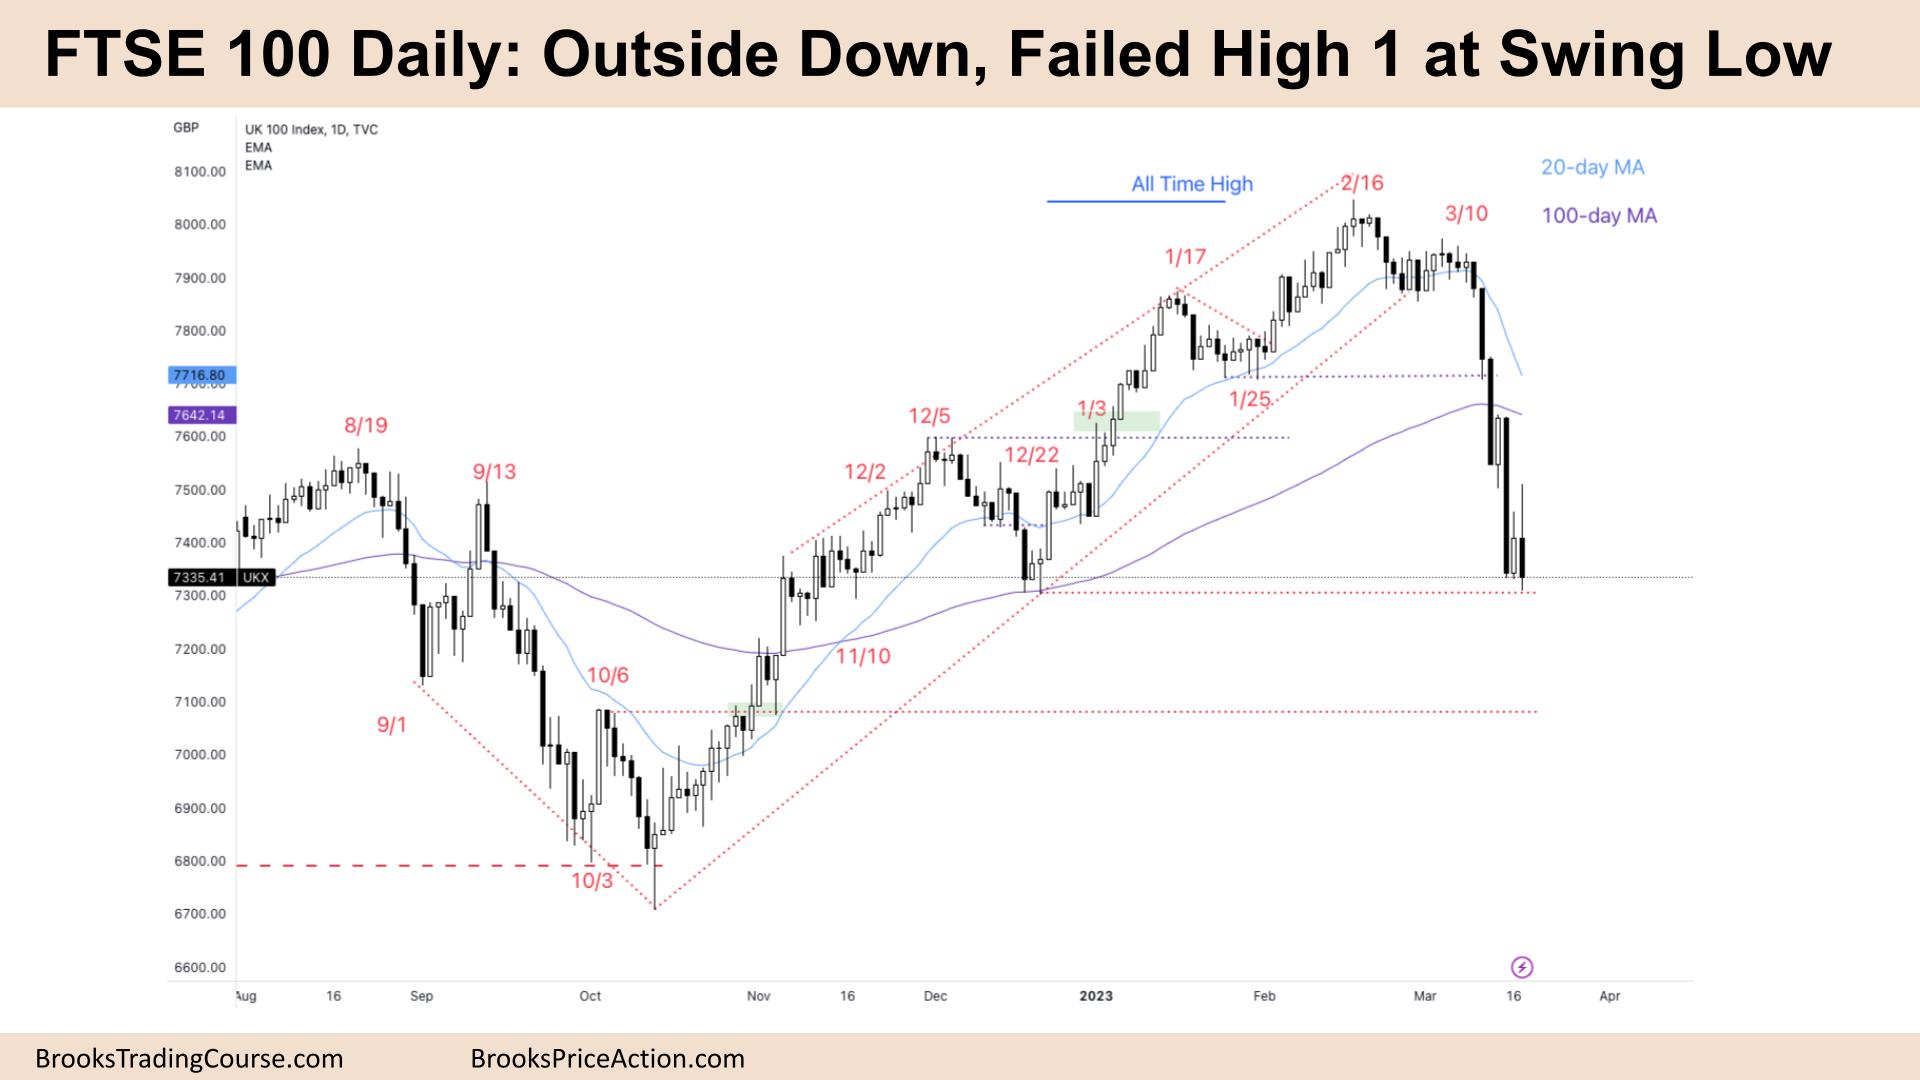 FTSE 100 Outside Down, Failed High 1 at Swing Low